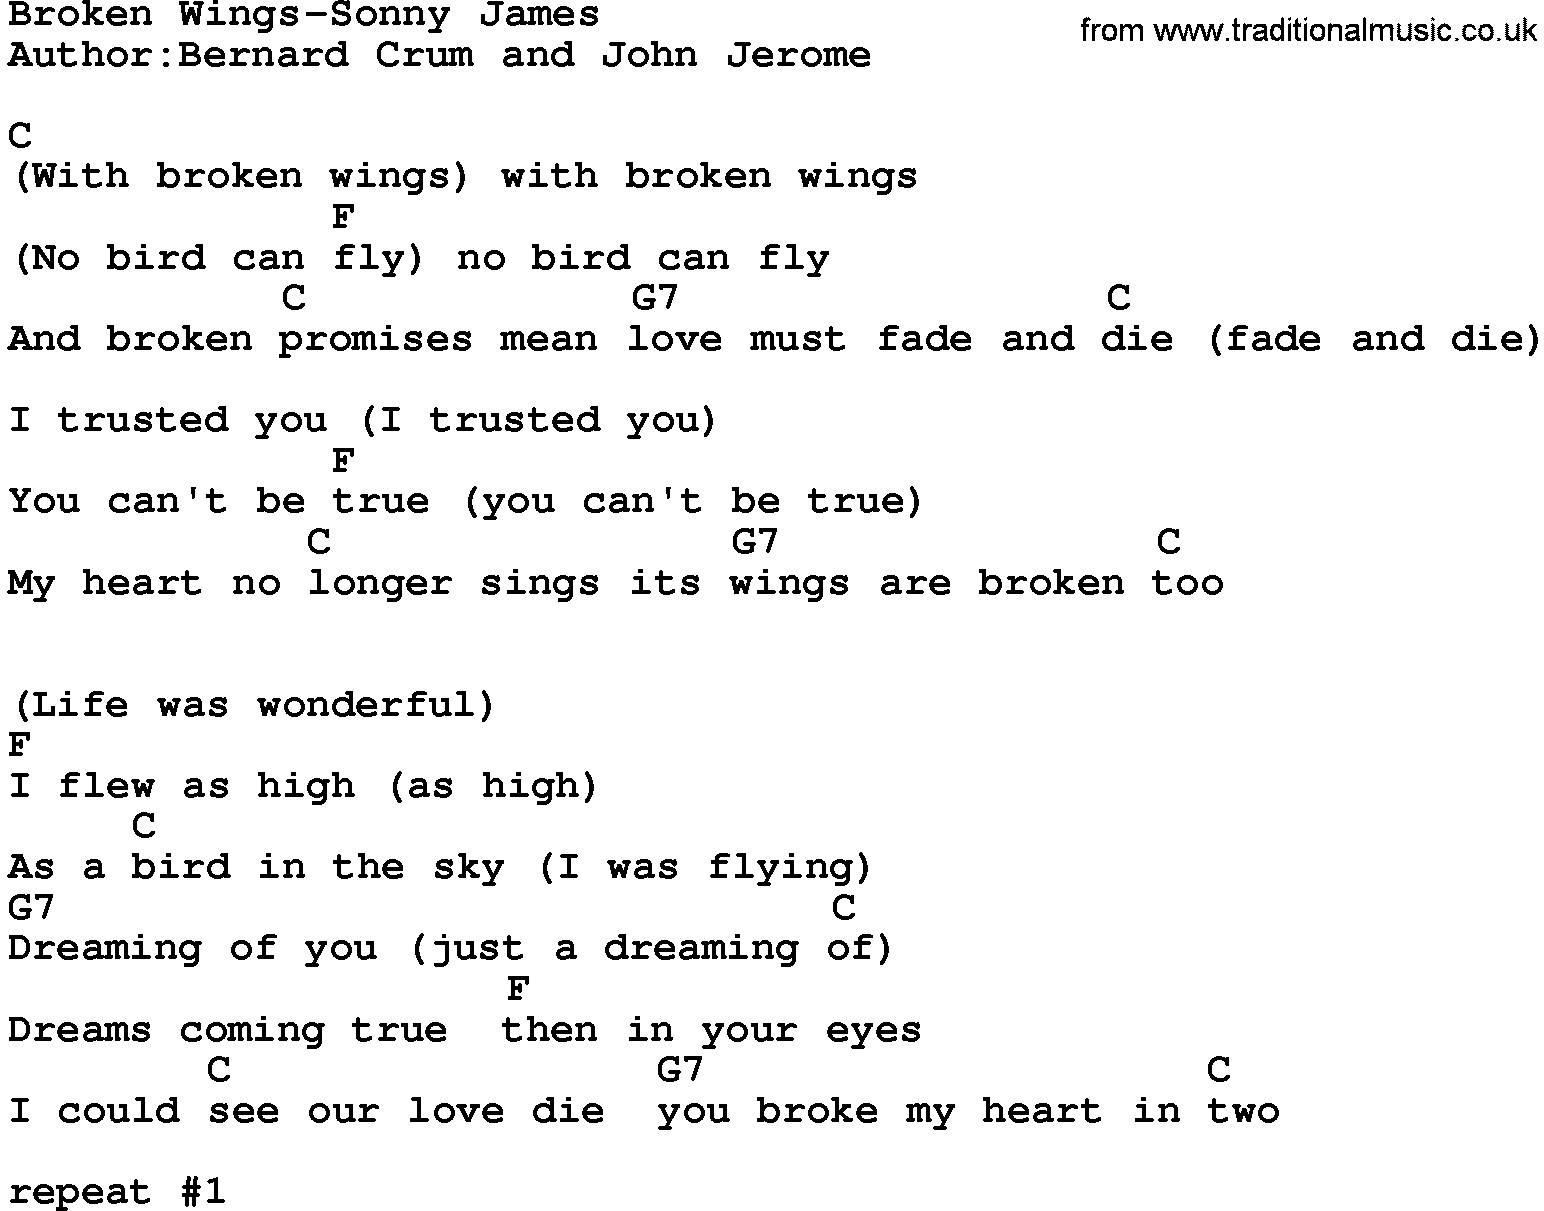 Country music song: Broken Wings-Sonny James lyrics and chords